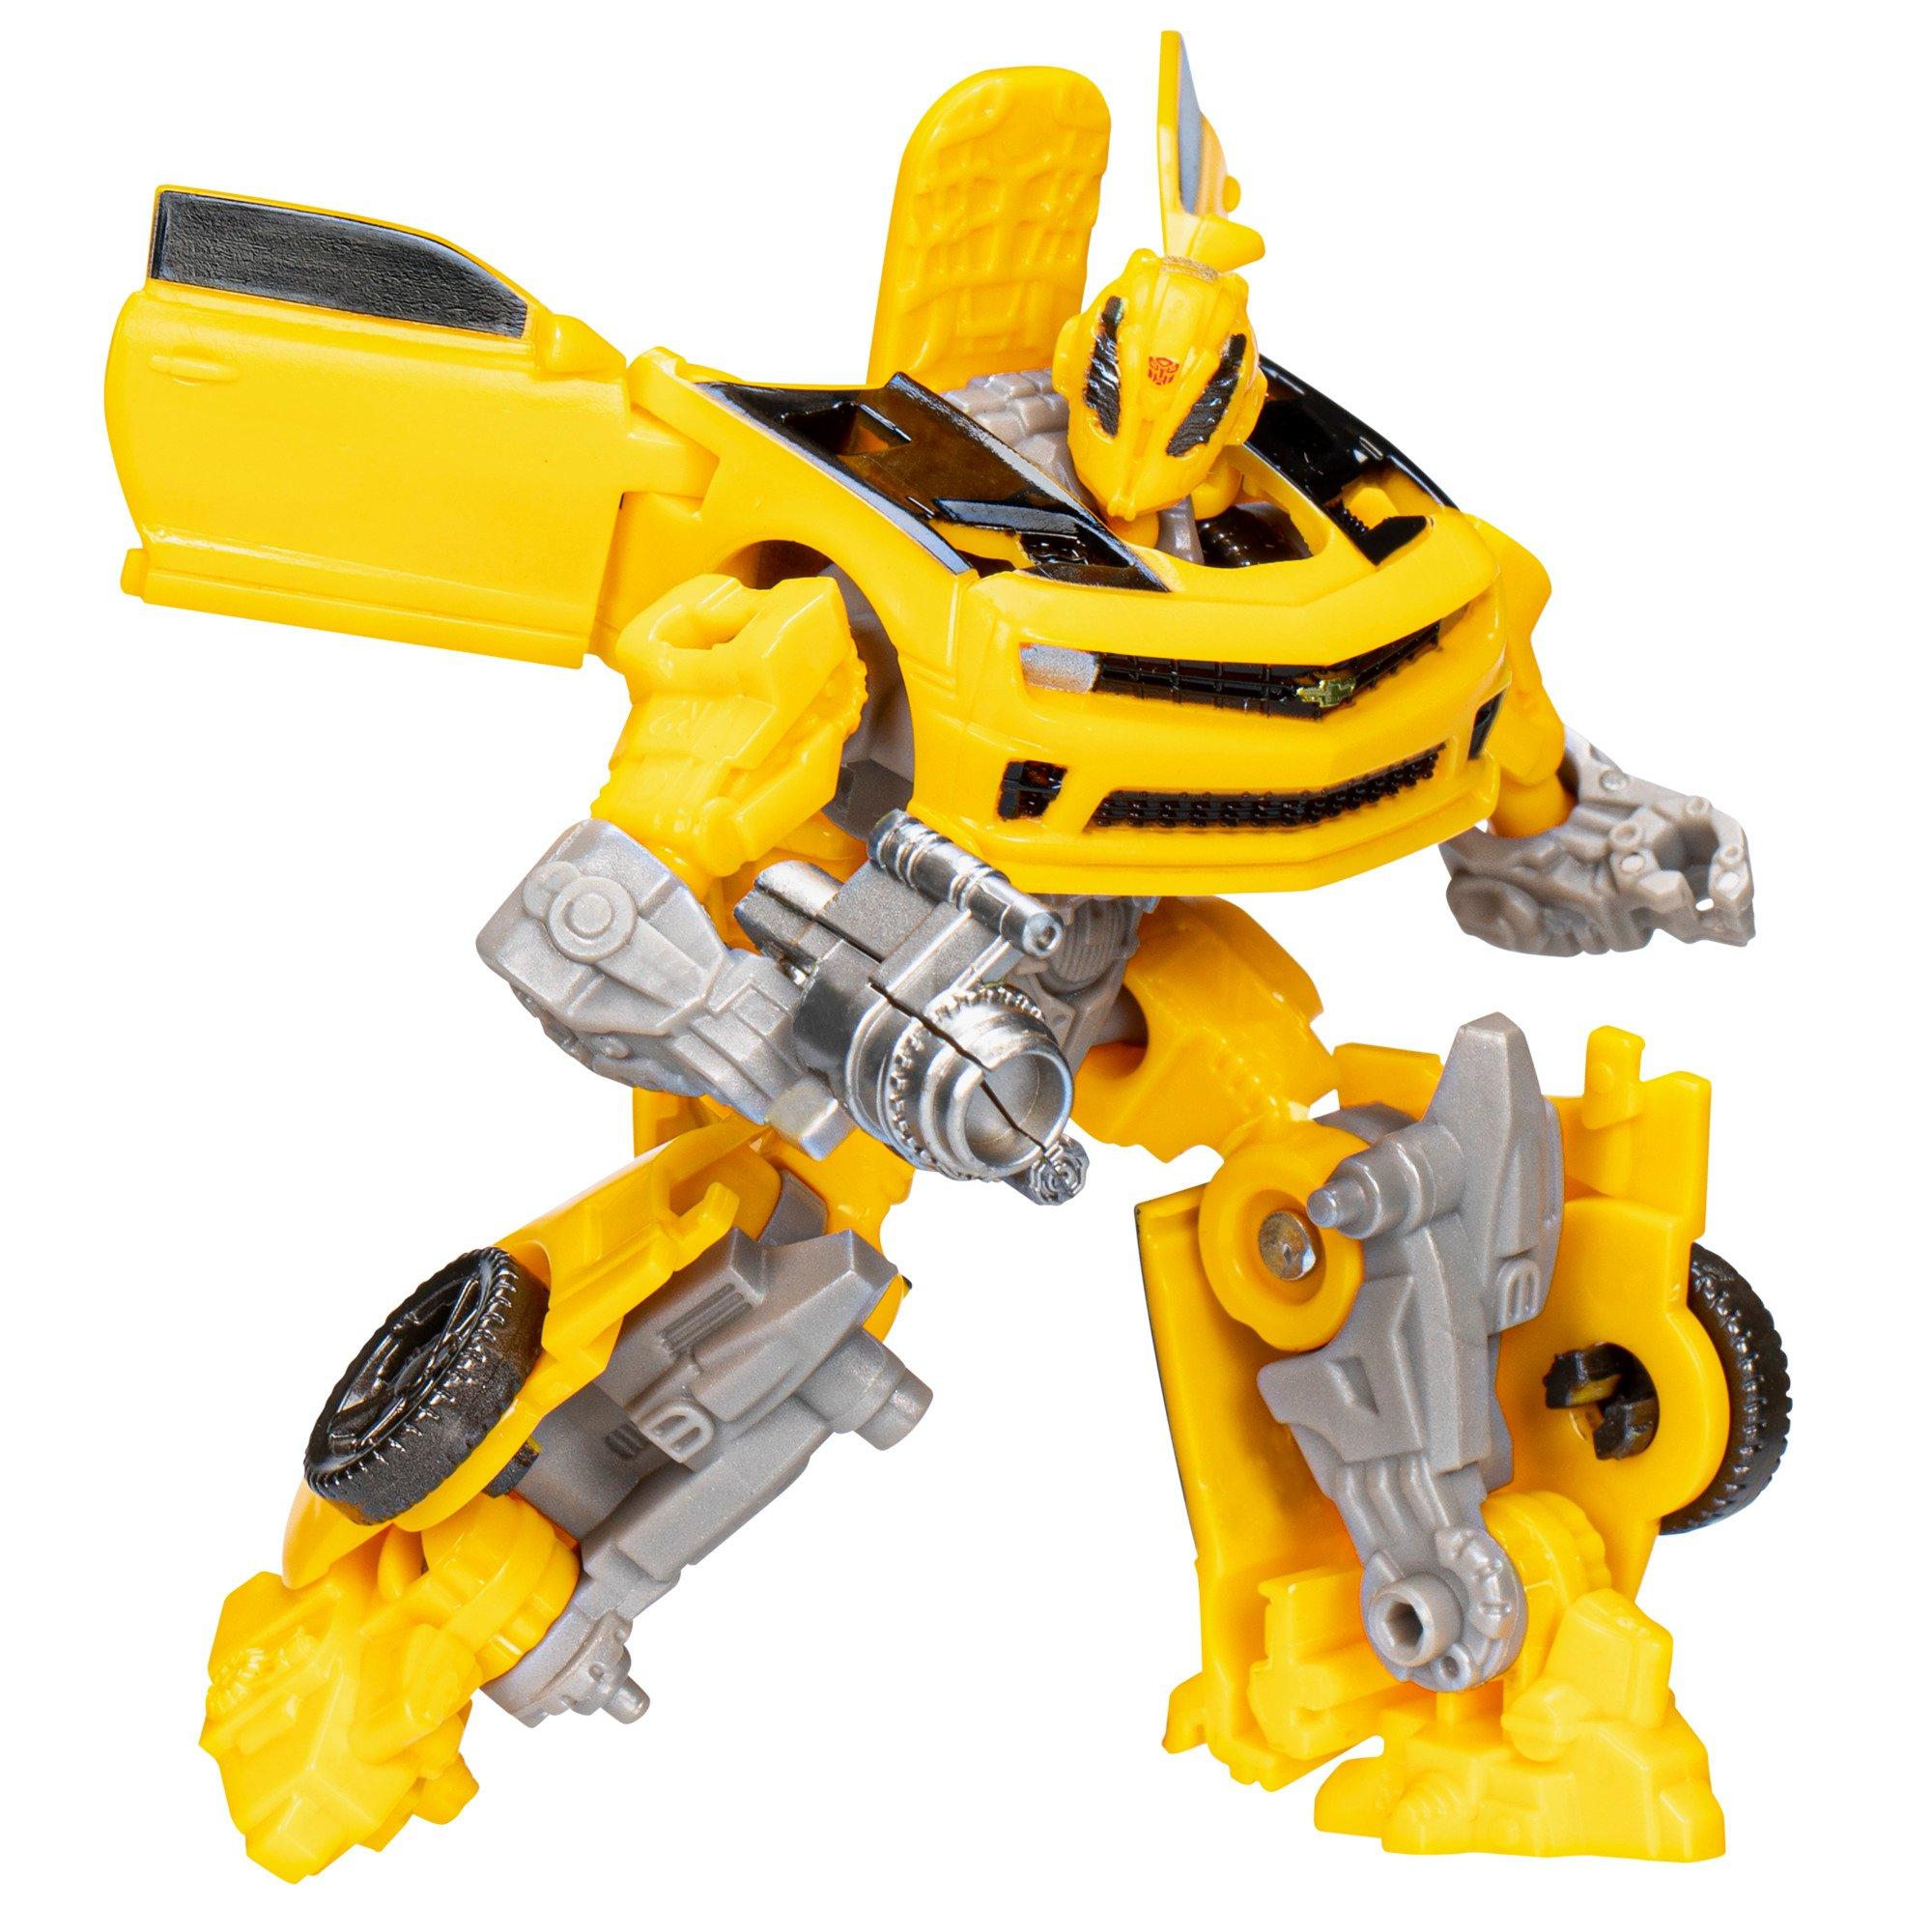 Transformers: R.E.D. Bumblebee Kids Toy Action Figure for Boys and